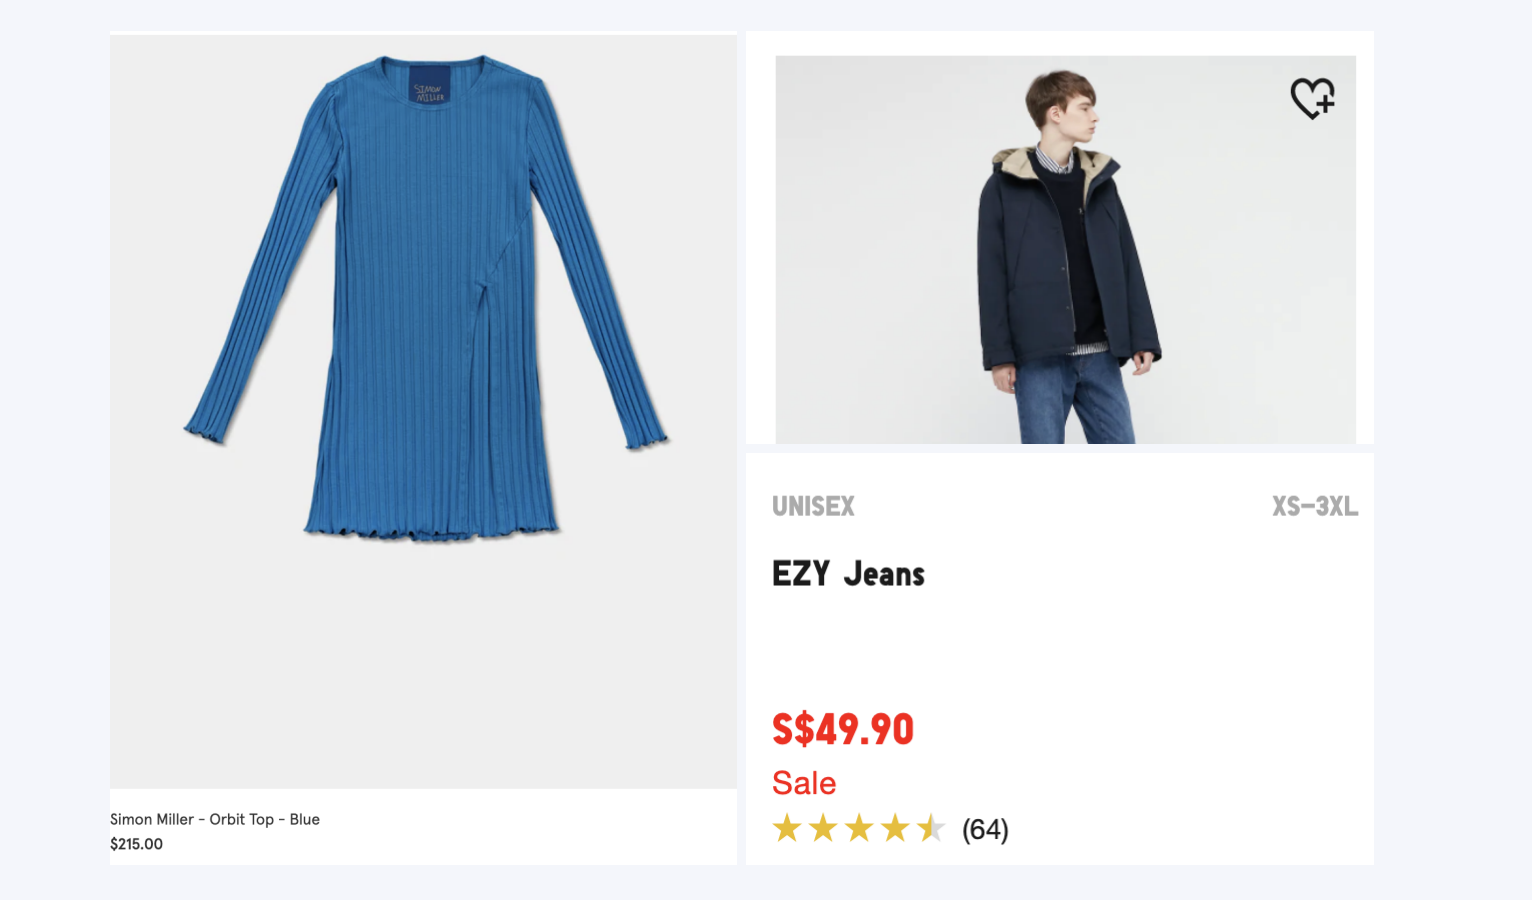 Example of charm pricing by Uniqlo